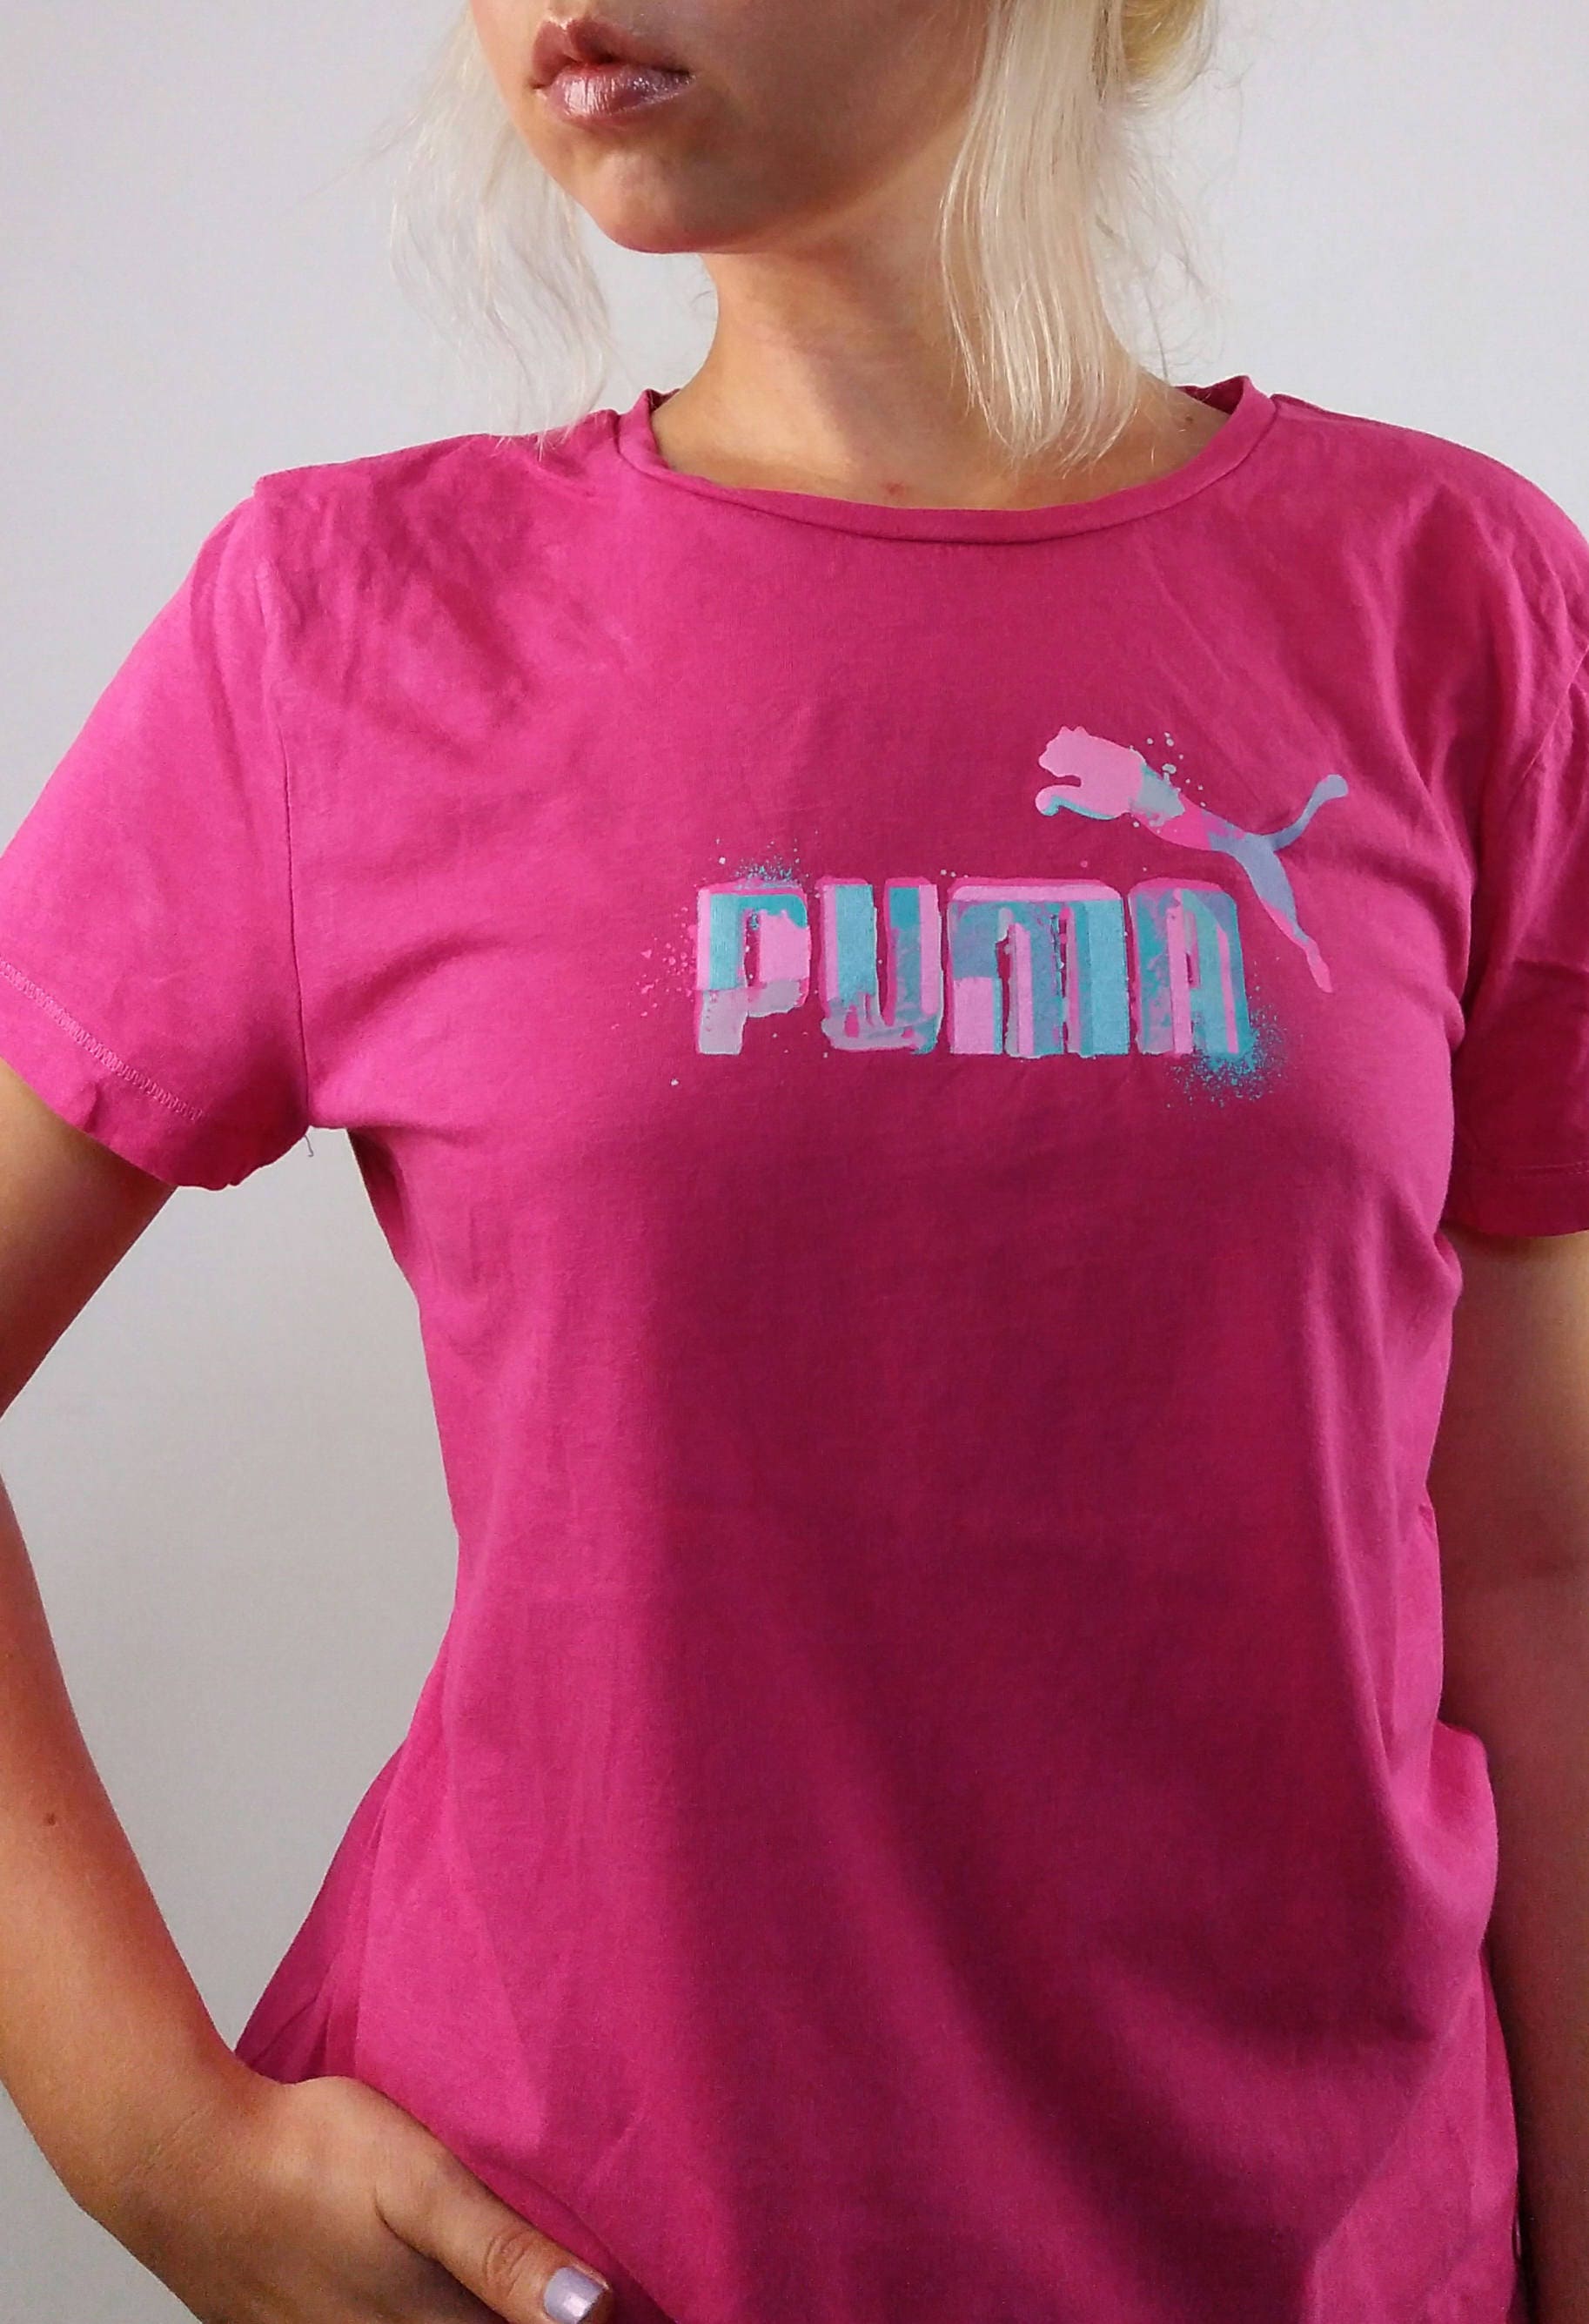 Shirt - Etsy Vintage Y2K Women Shirt Top Logo S-M T in Size PUMA Hot Pink With 90\'s Front